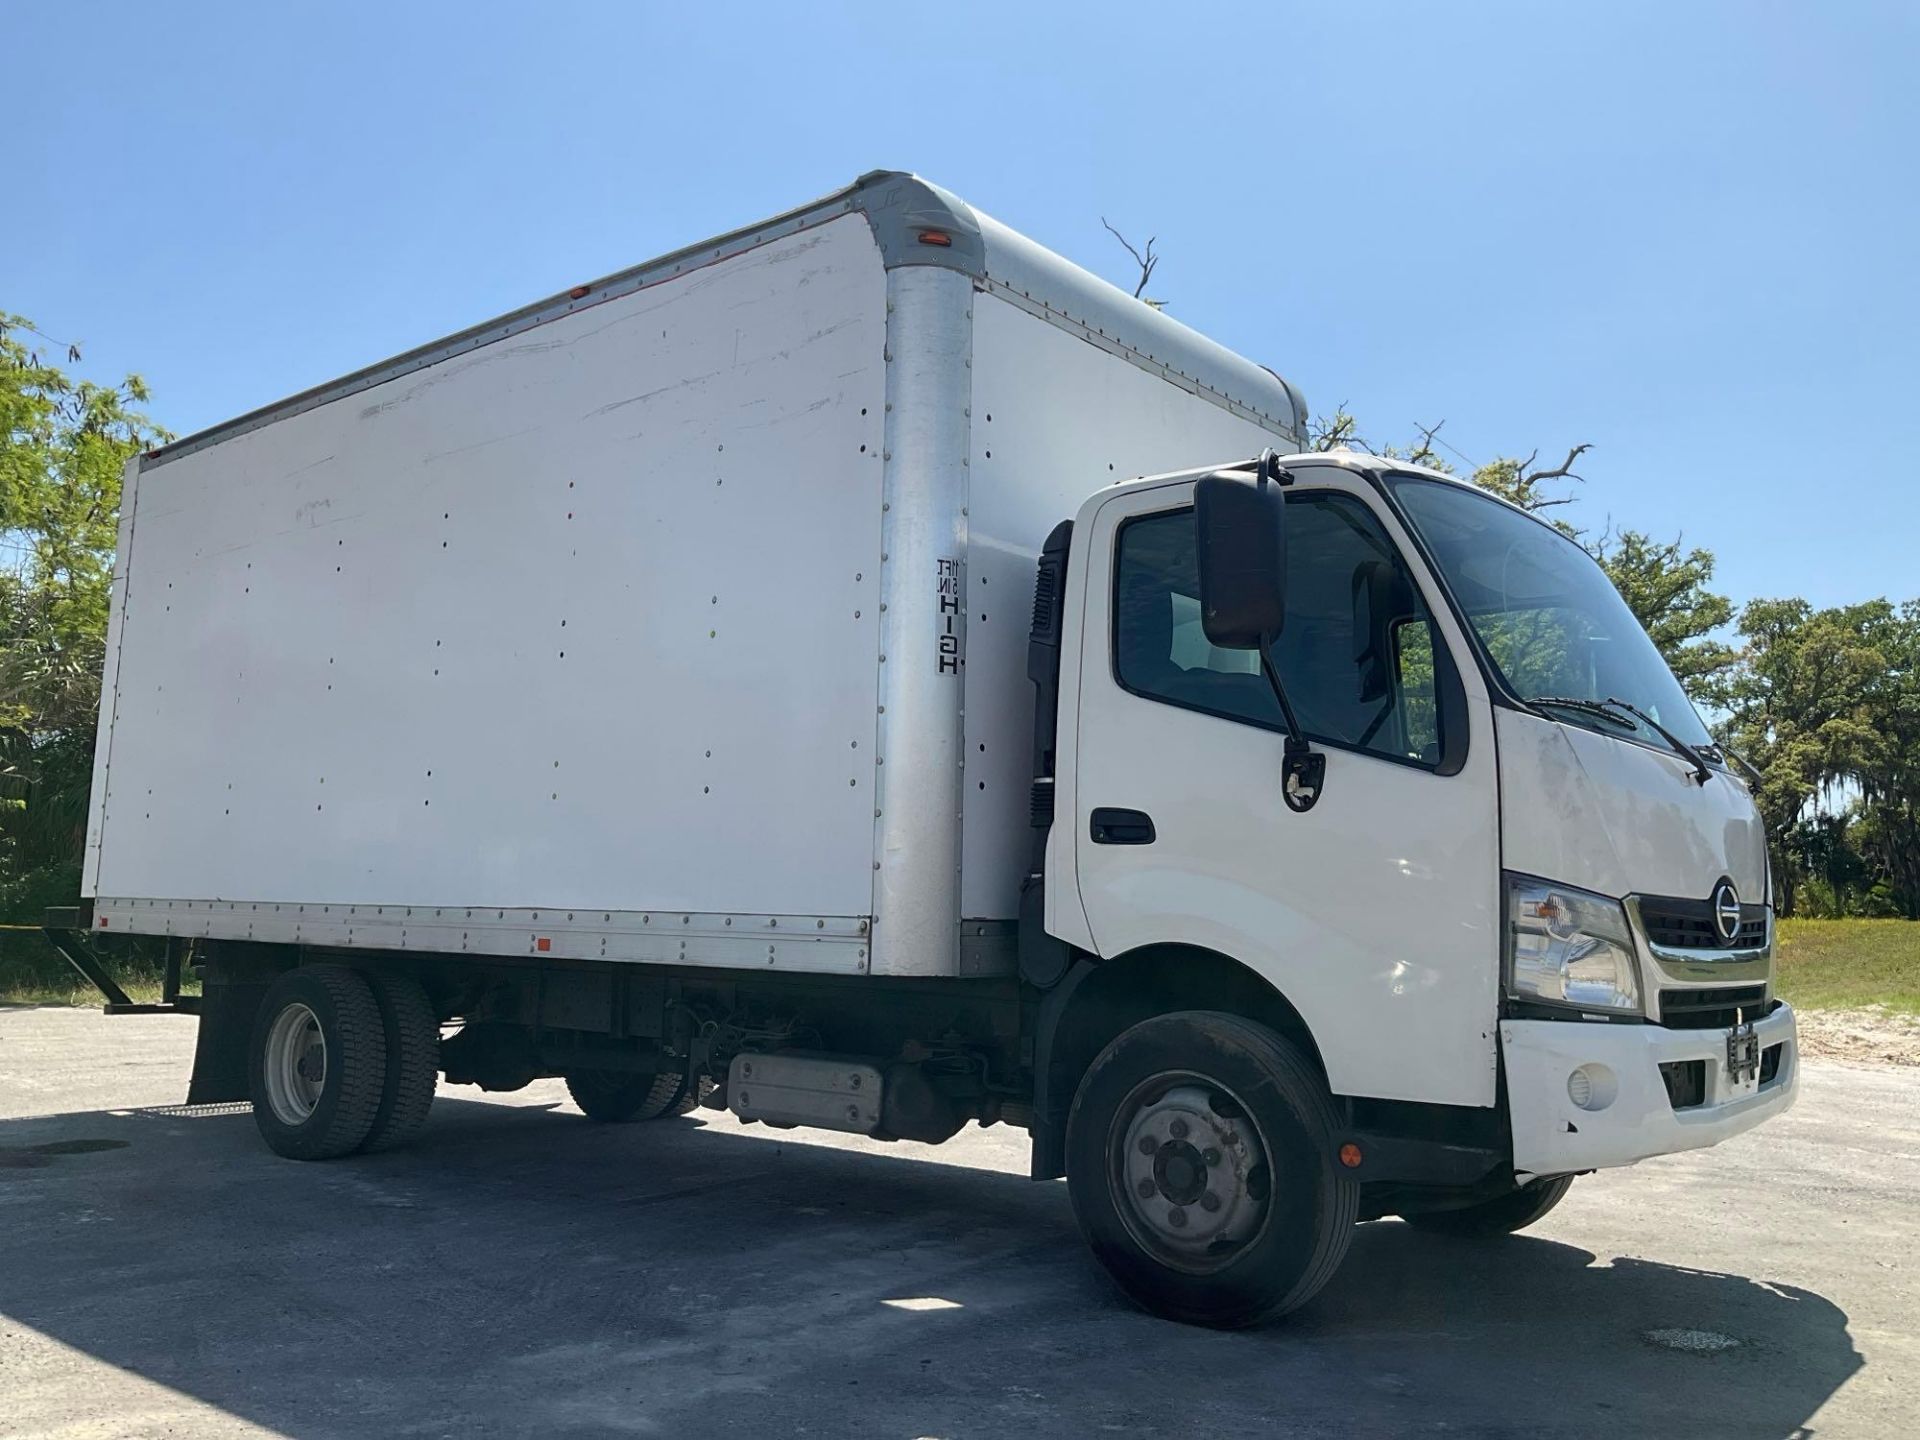 2017 HINO 740 BOX TRUCK , DIESEL , APPROX GVWR 17,950 LBS, BOX BODY APPROX 18FT, ETRACKS, BACK UP... - Image 8 of 29